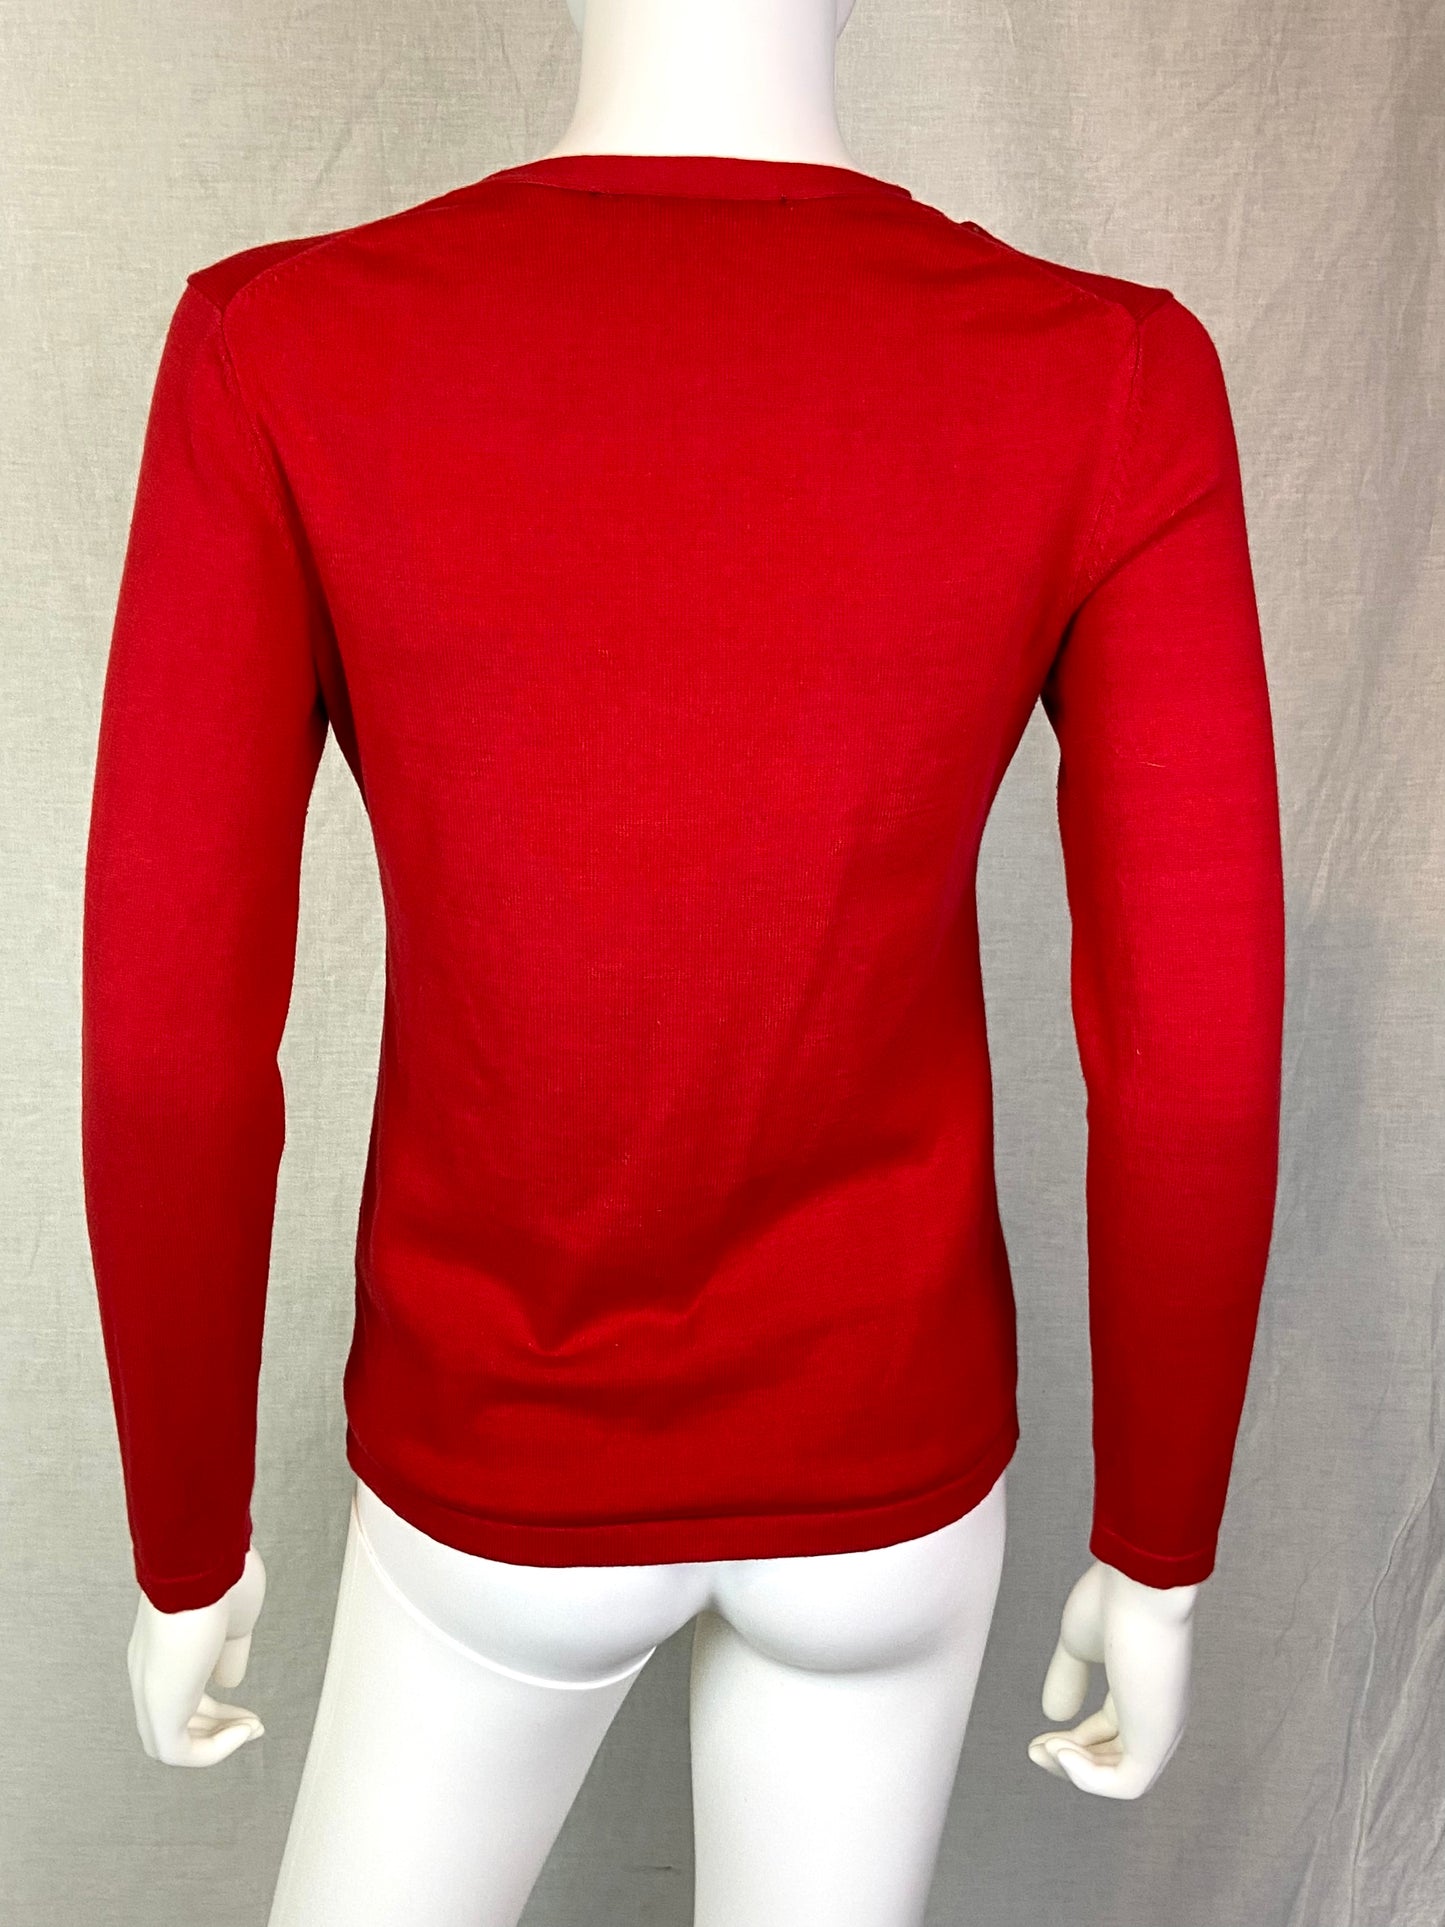 Tommy Hilfiger Studded Red Top Small